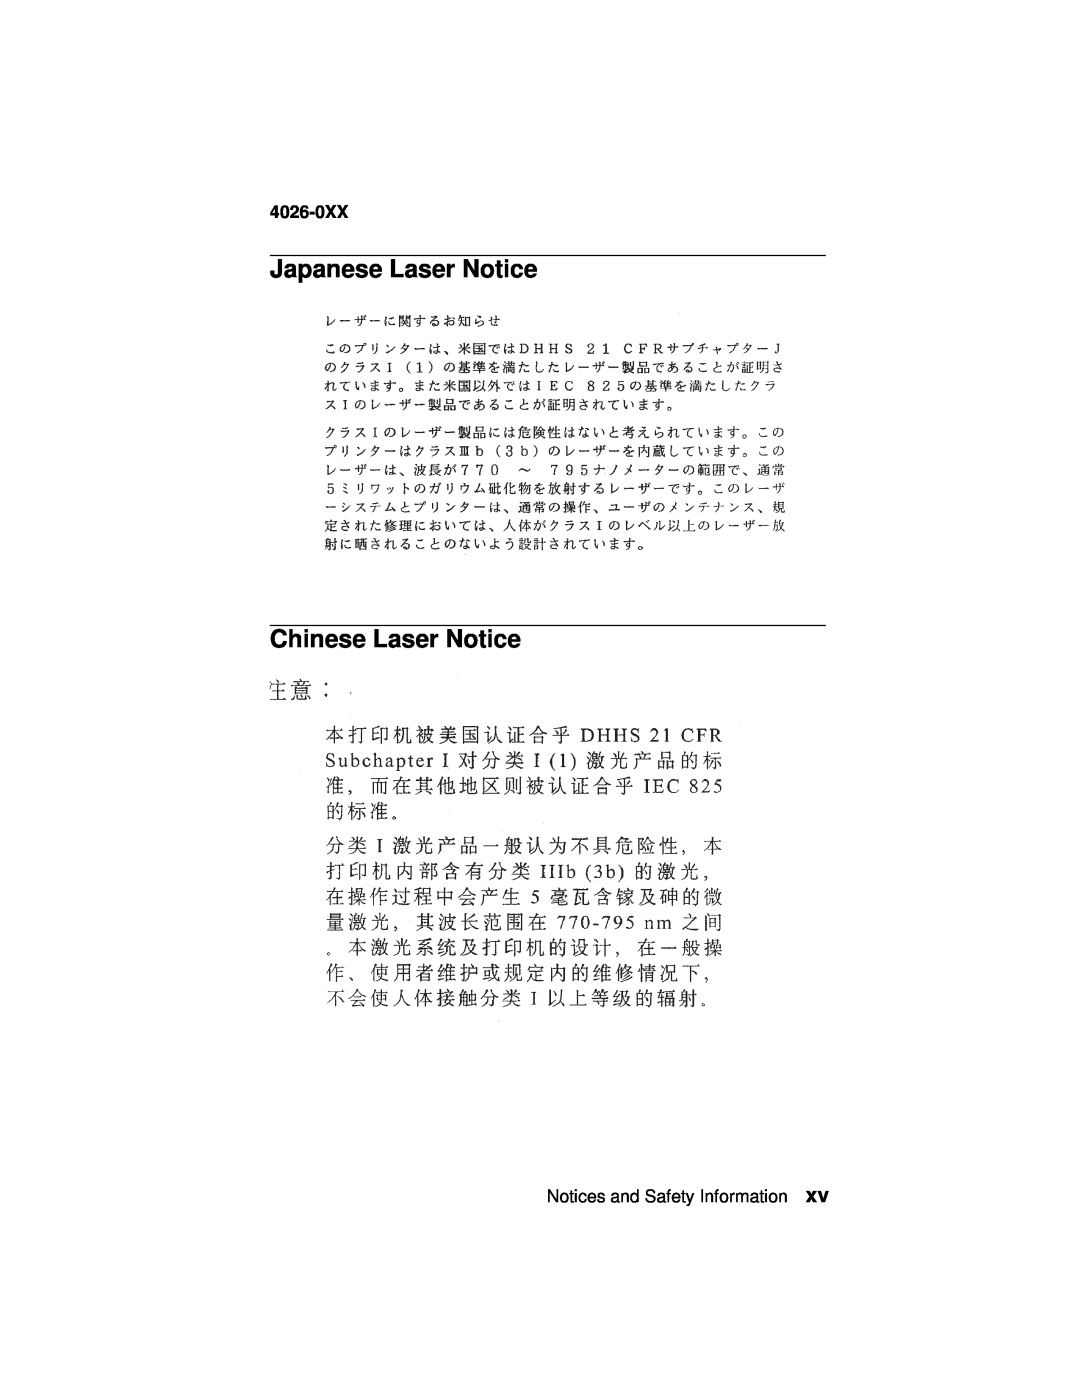 Lexmark OptraTM manual Japanese Laser Notice Chinese Laser Notice, 4026-0XX, Notices and Safety Information 